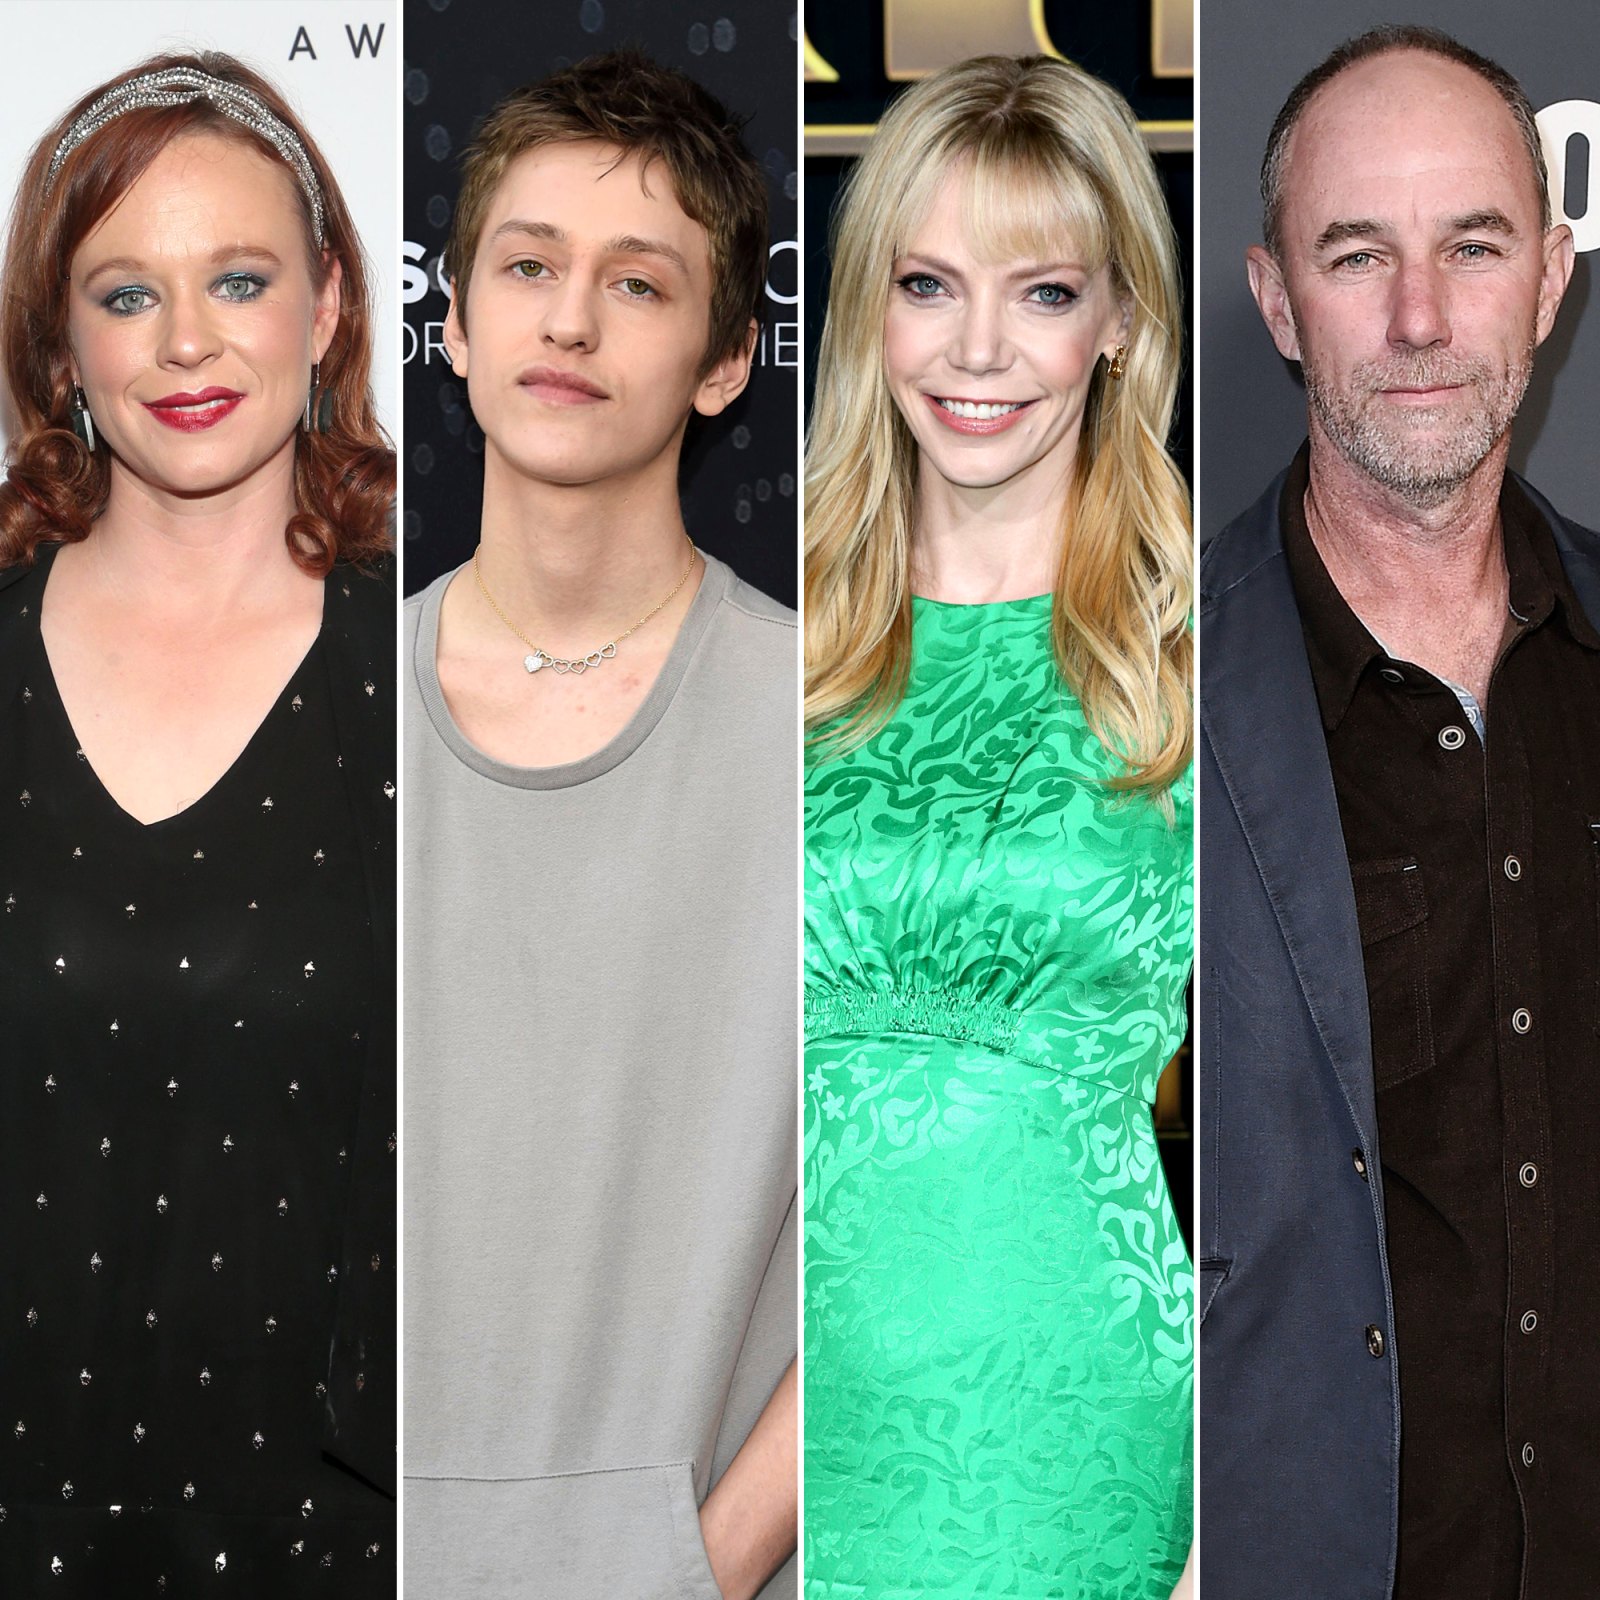 The Cast is Set for Tim Burton's 'Addams Family' Spinoff, 'Wednesday'